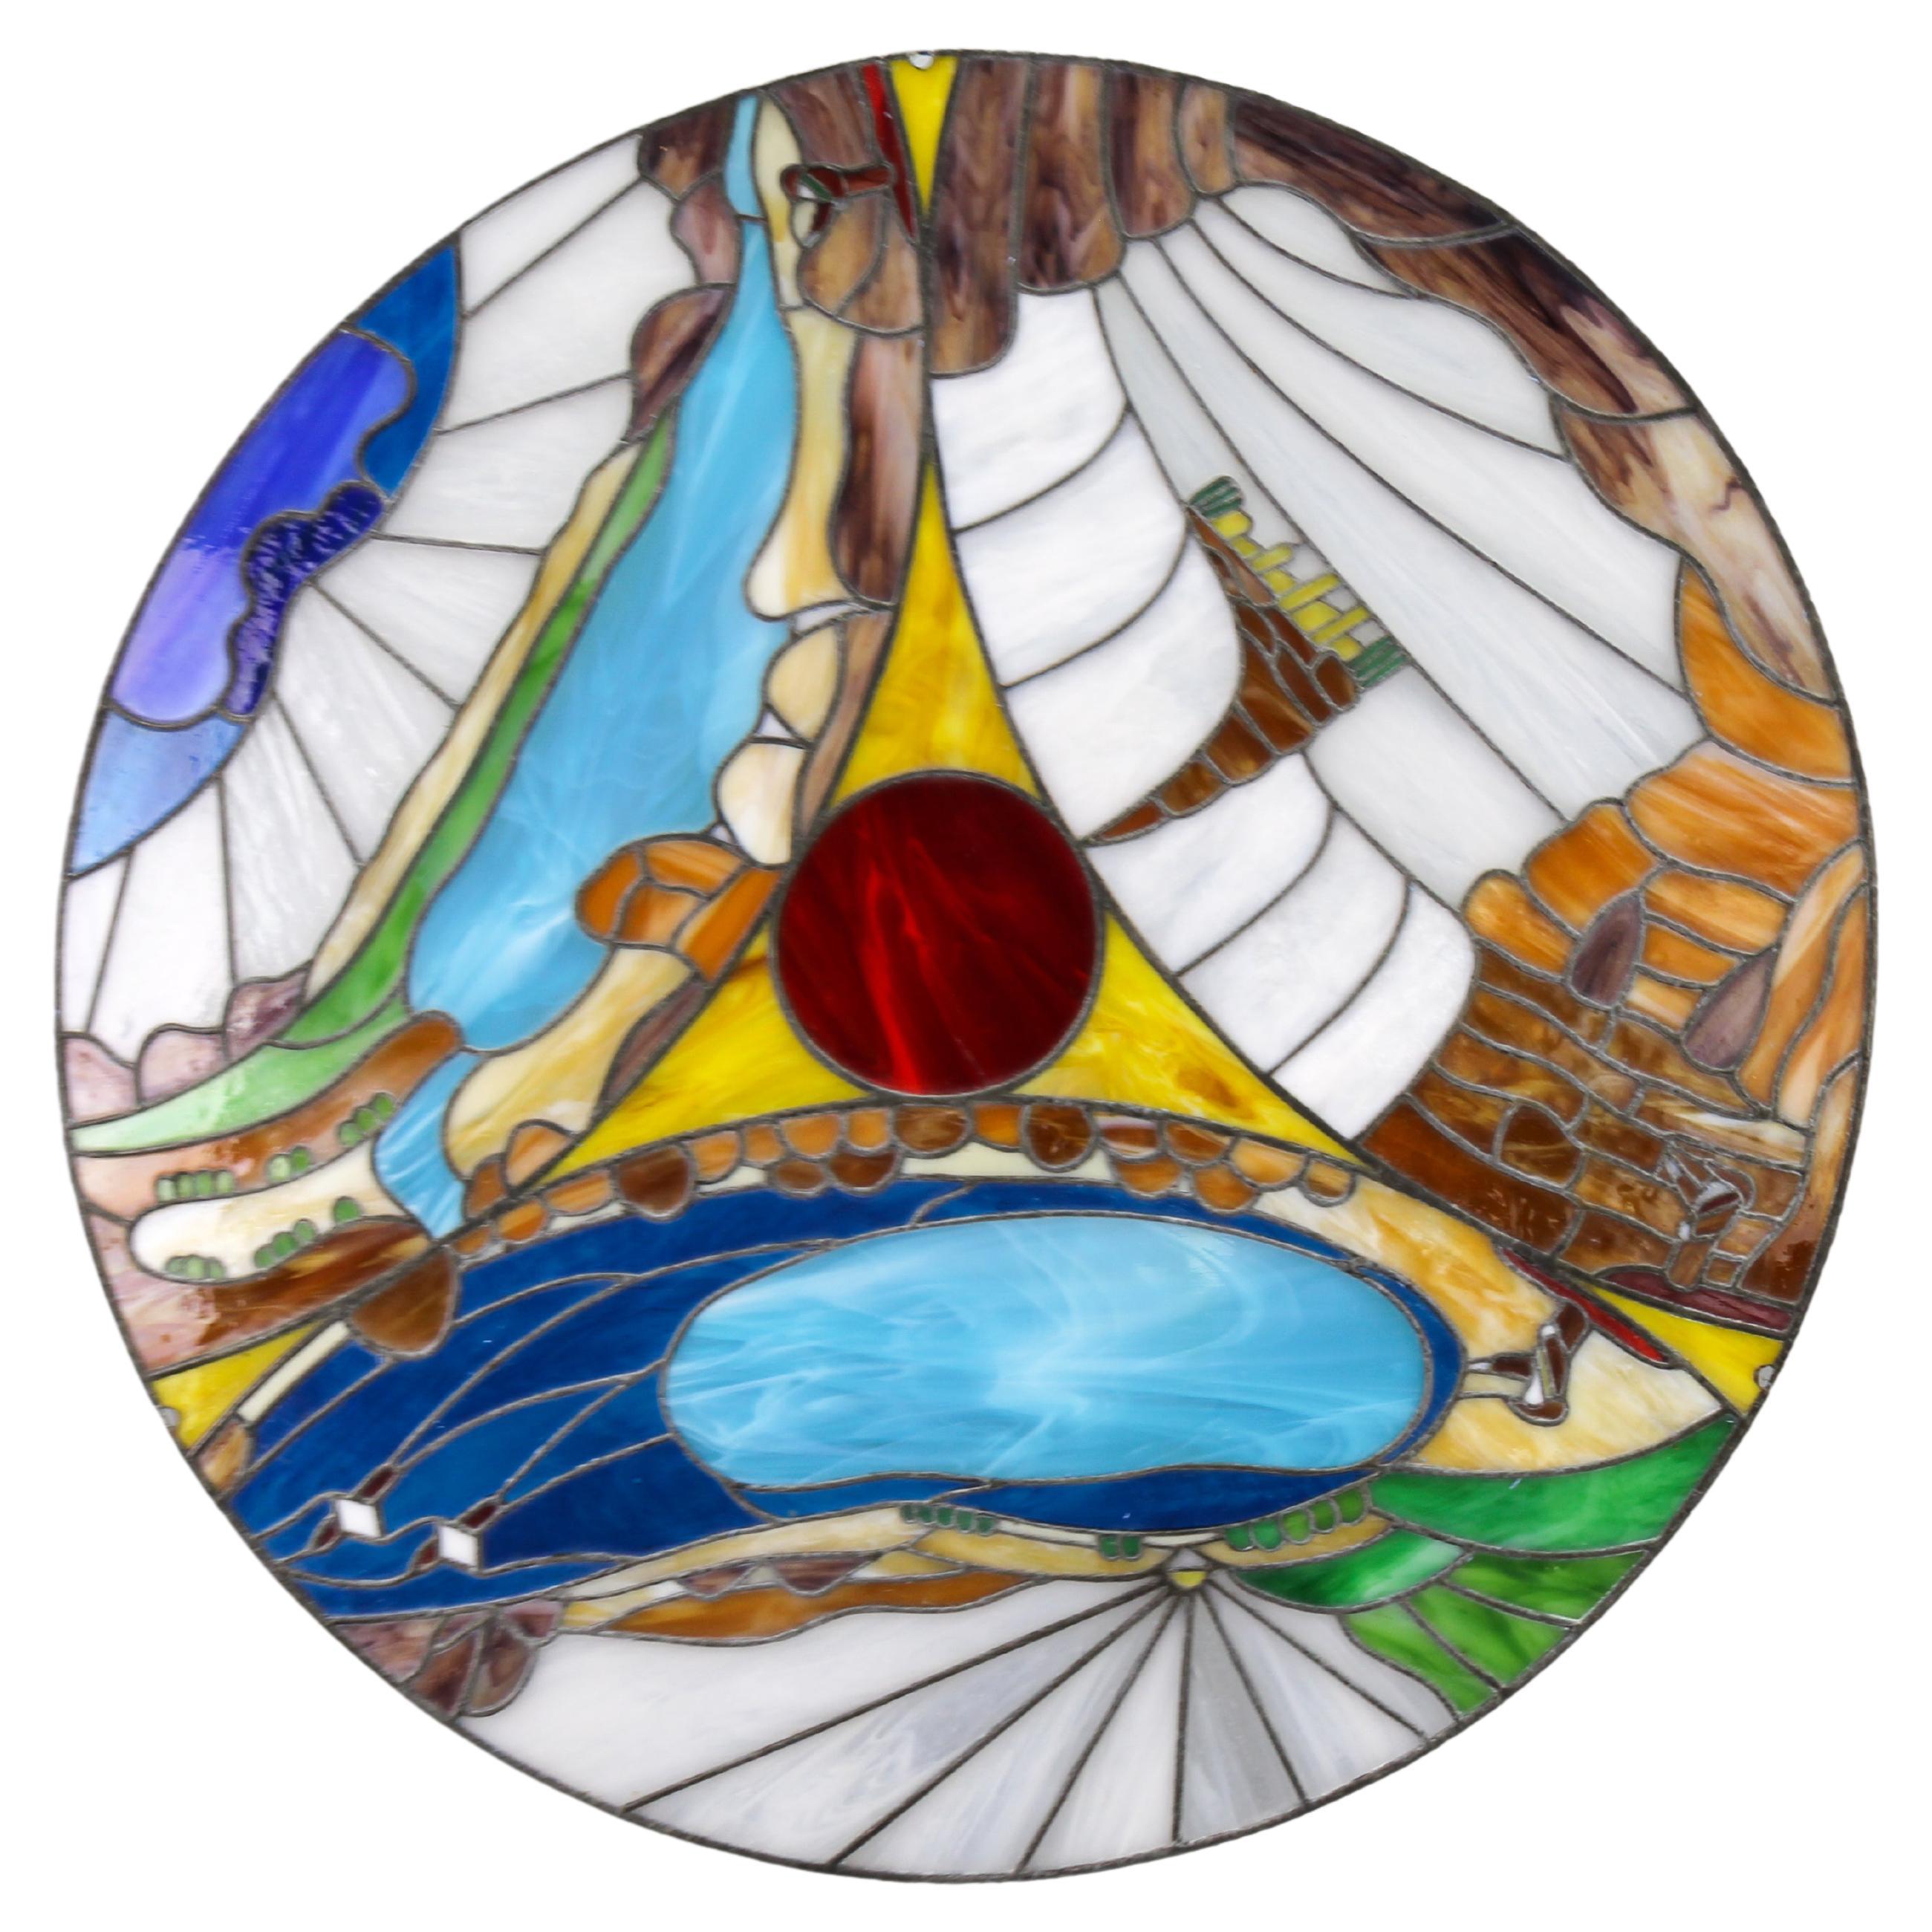 Round Polychrome Tiffany-Style Stained Glass Window Panel, 1970s For Sale